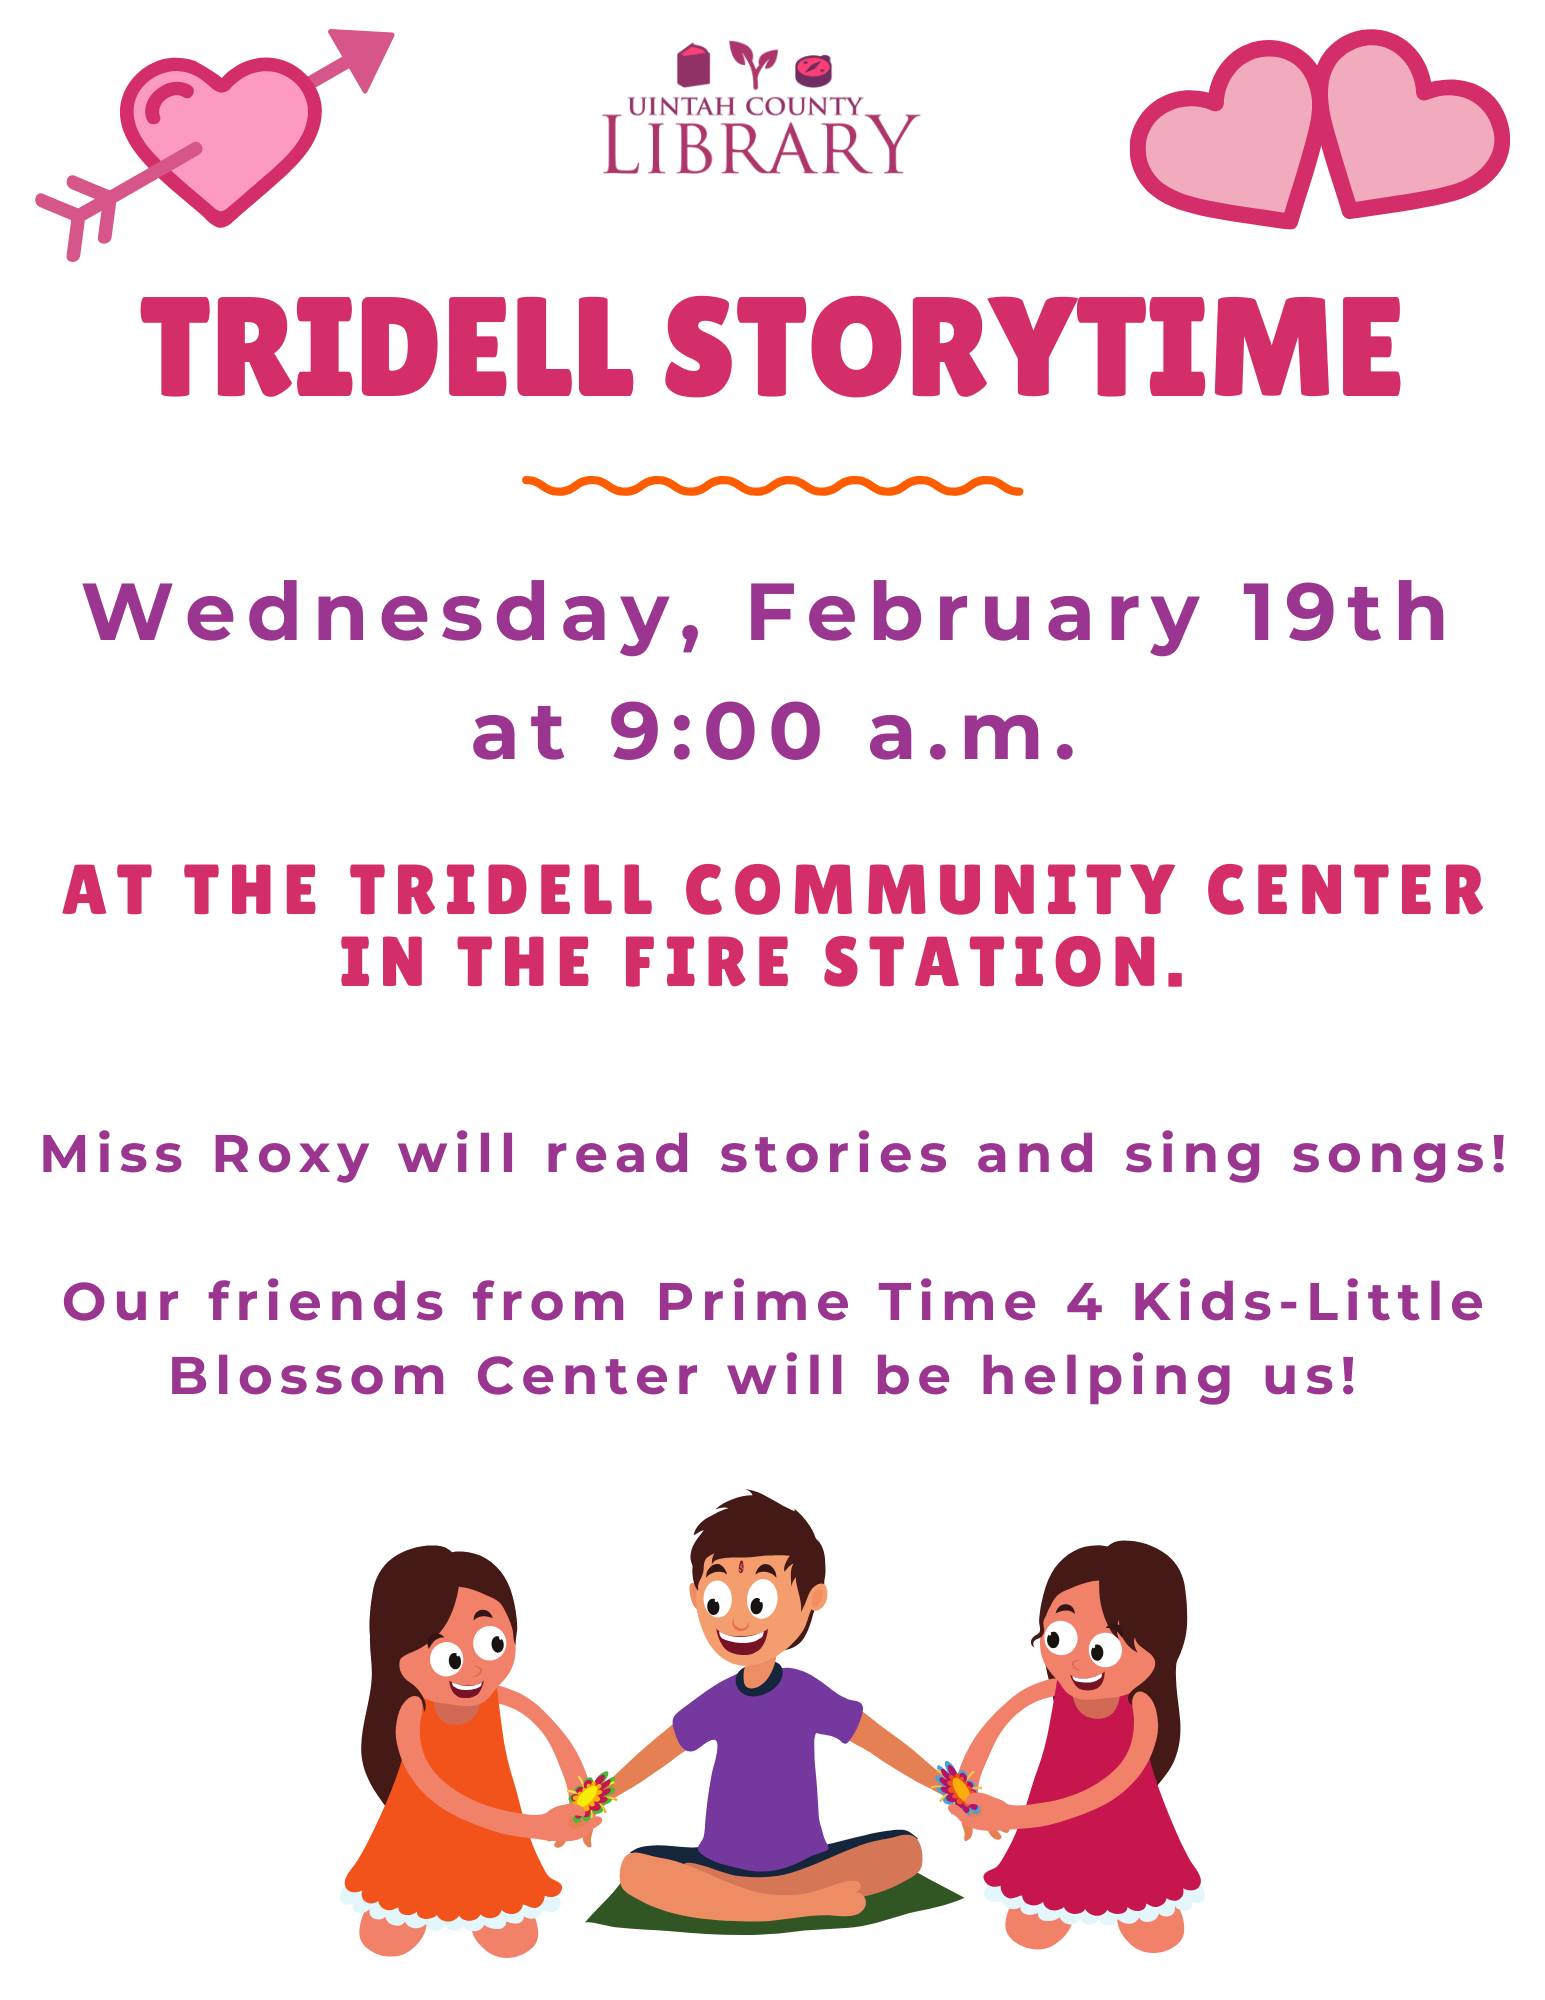 Tridell Storytime Wednesday, February 19th at 9:00 a.m. at the Tridell Community Center in the Fire Station. Miss Roxy will read stories and sing songs! Our friends from Prime Time 4 Kids-Little Blossom Center will be helping us! 